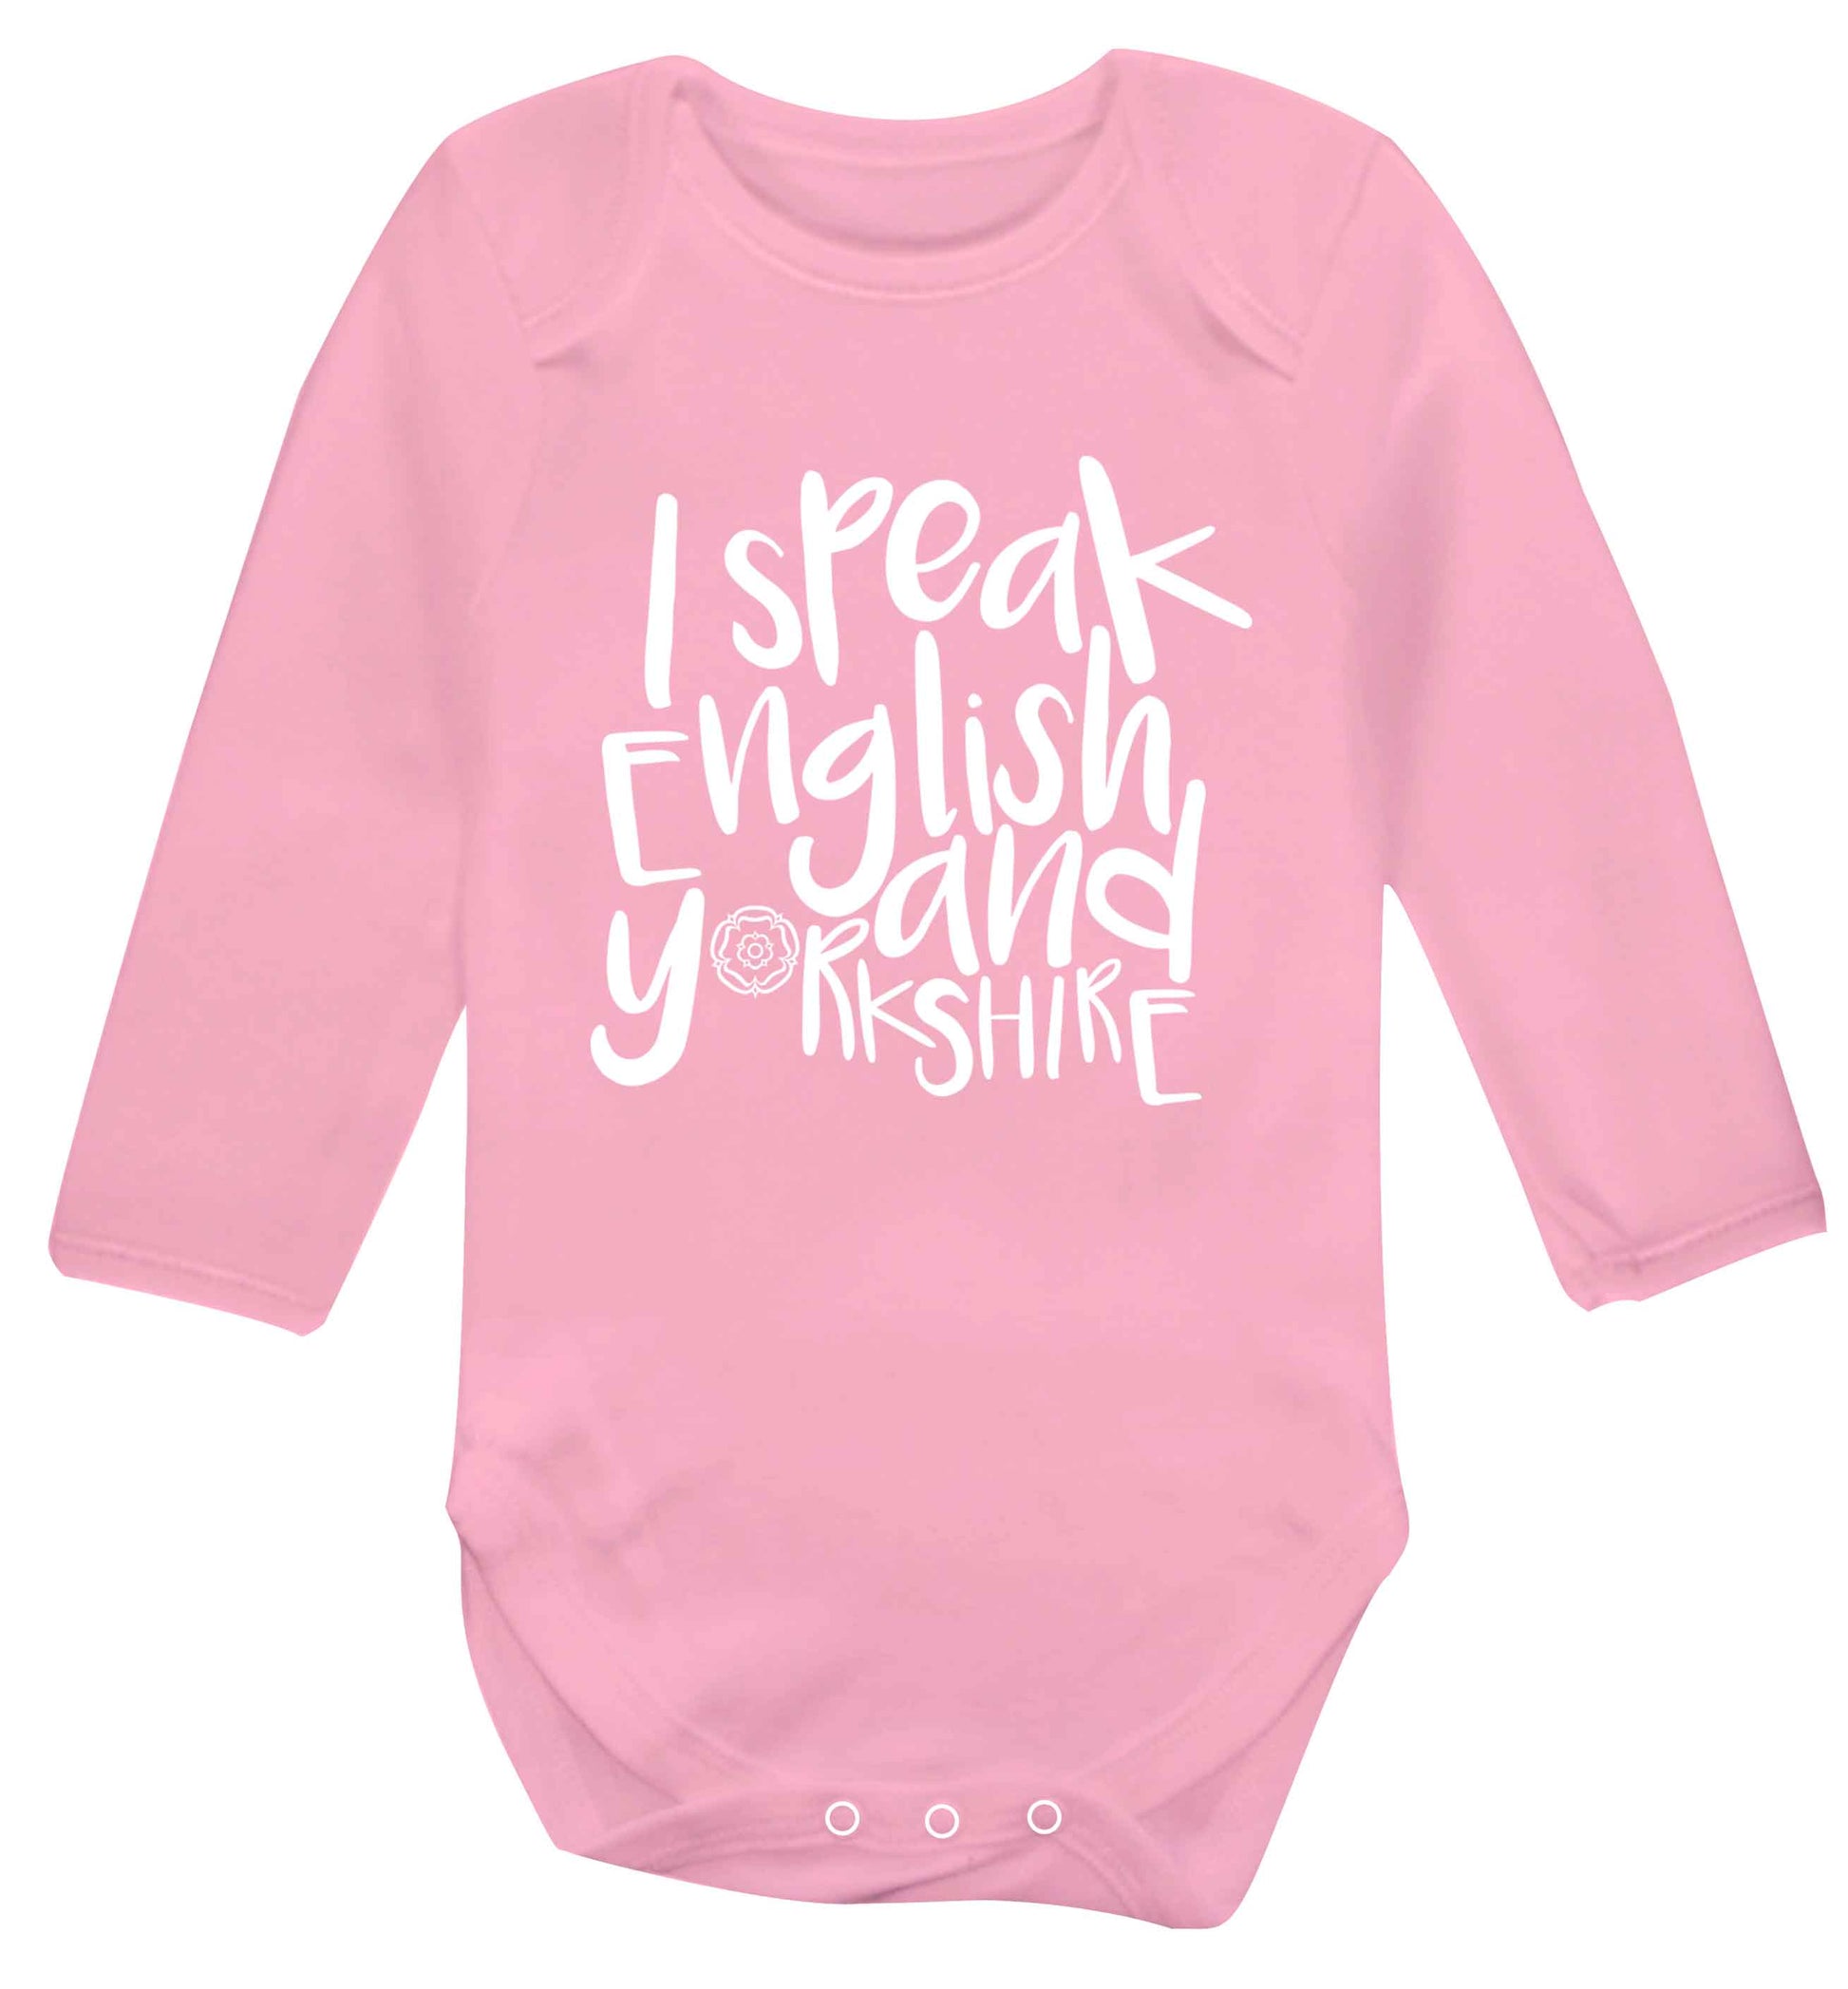 I speak English and Yorkshire Baby Vest long sleeved pale pink 6-12 months